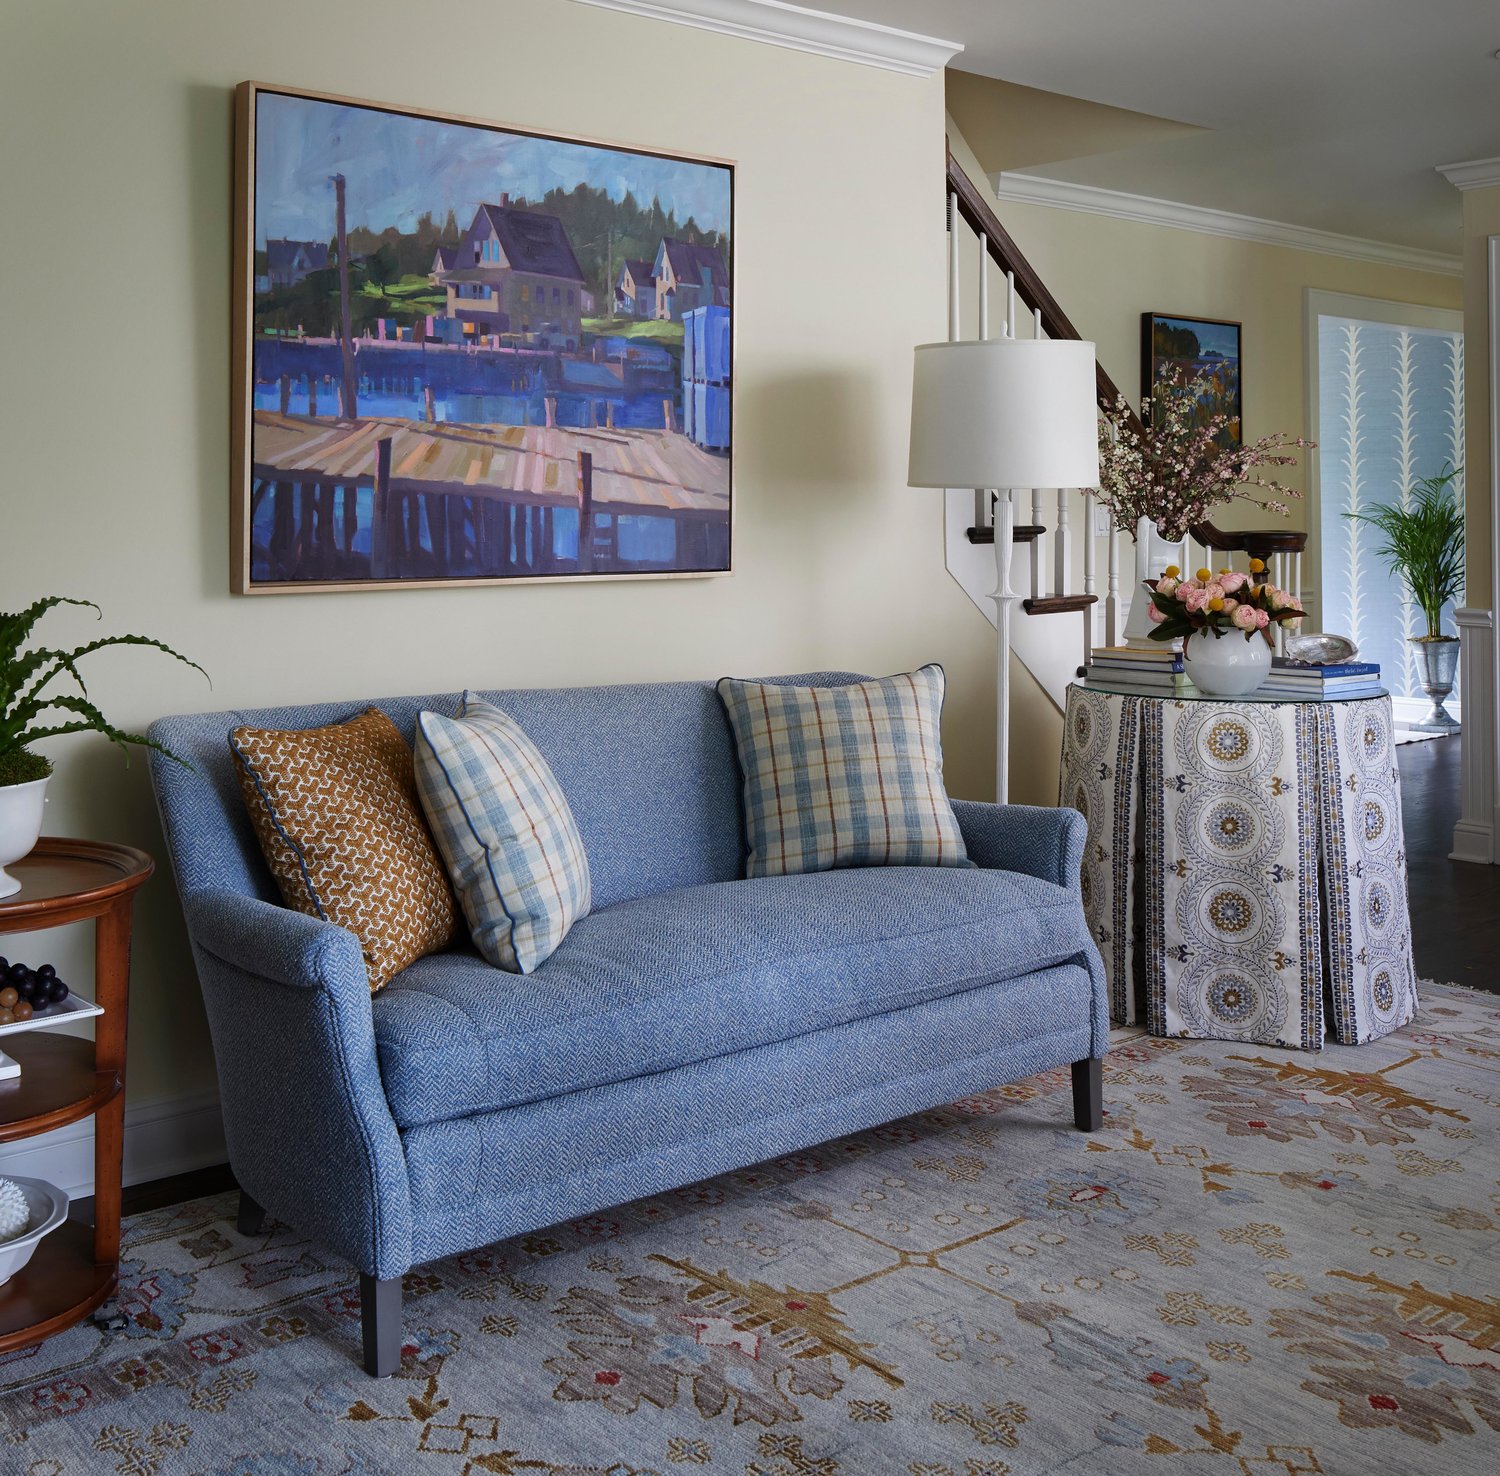 Traditional living room with blue loveseat. Come see more interior design inspiration from Elizabeth Drake. Photo by Werner Straube. #interiordesign #classicdesign #traditionaldecor #housetour #elizabethdrake